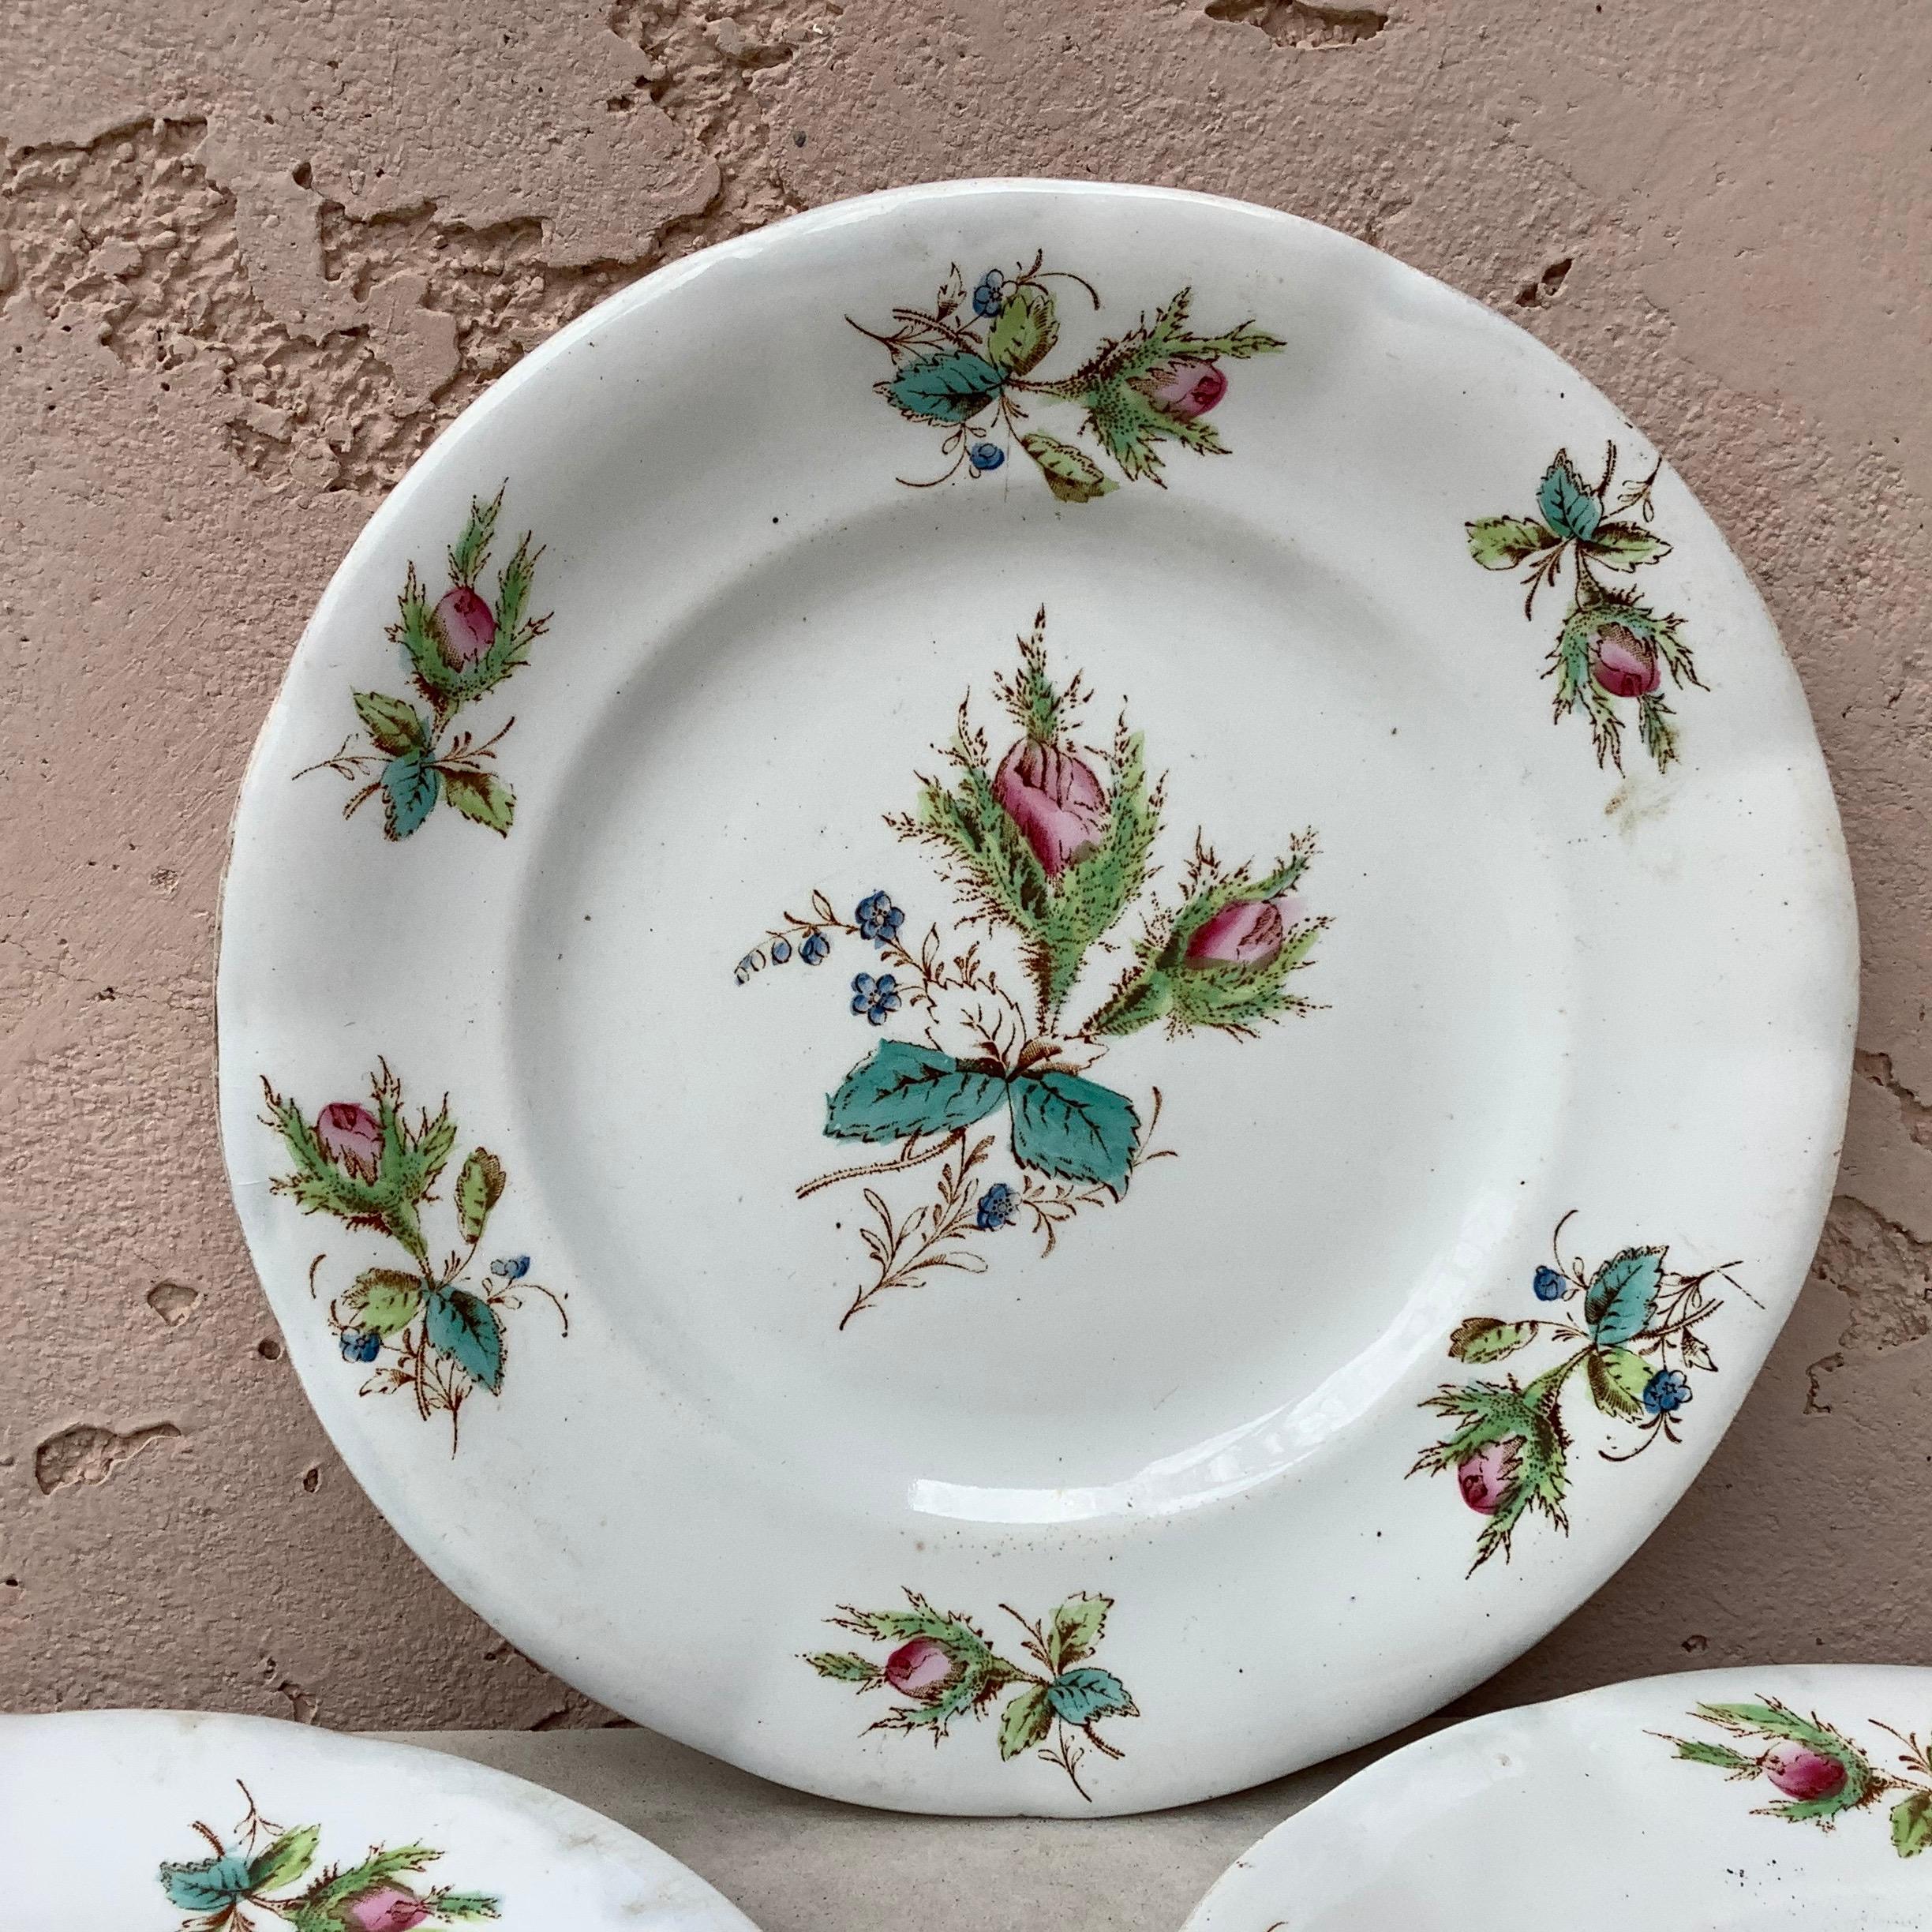 Charming set of 3 dessert plates decorated with pink roses, circa 1900 signed Keller and Guerin Luneville.